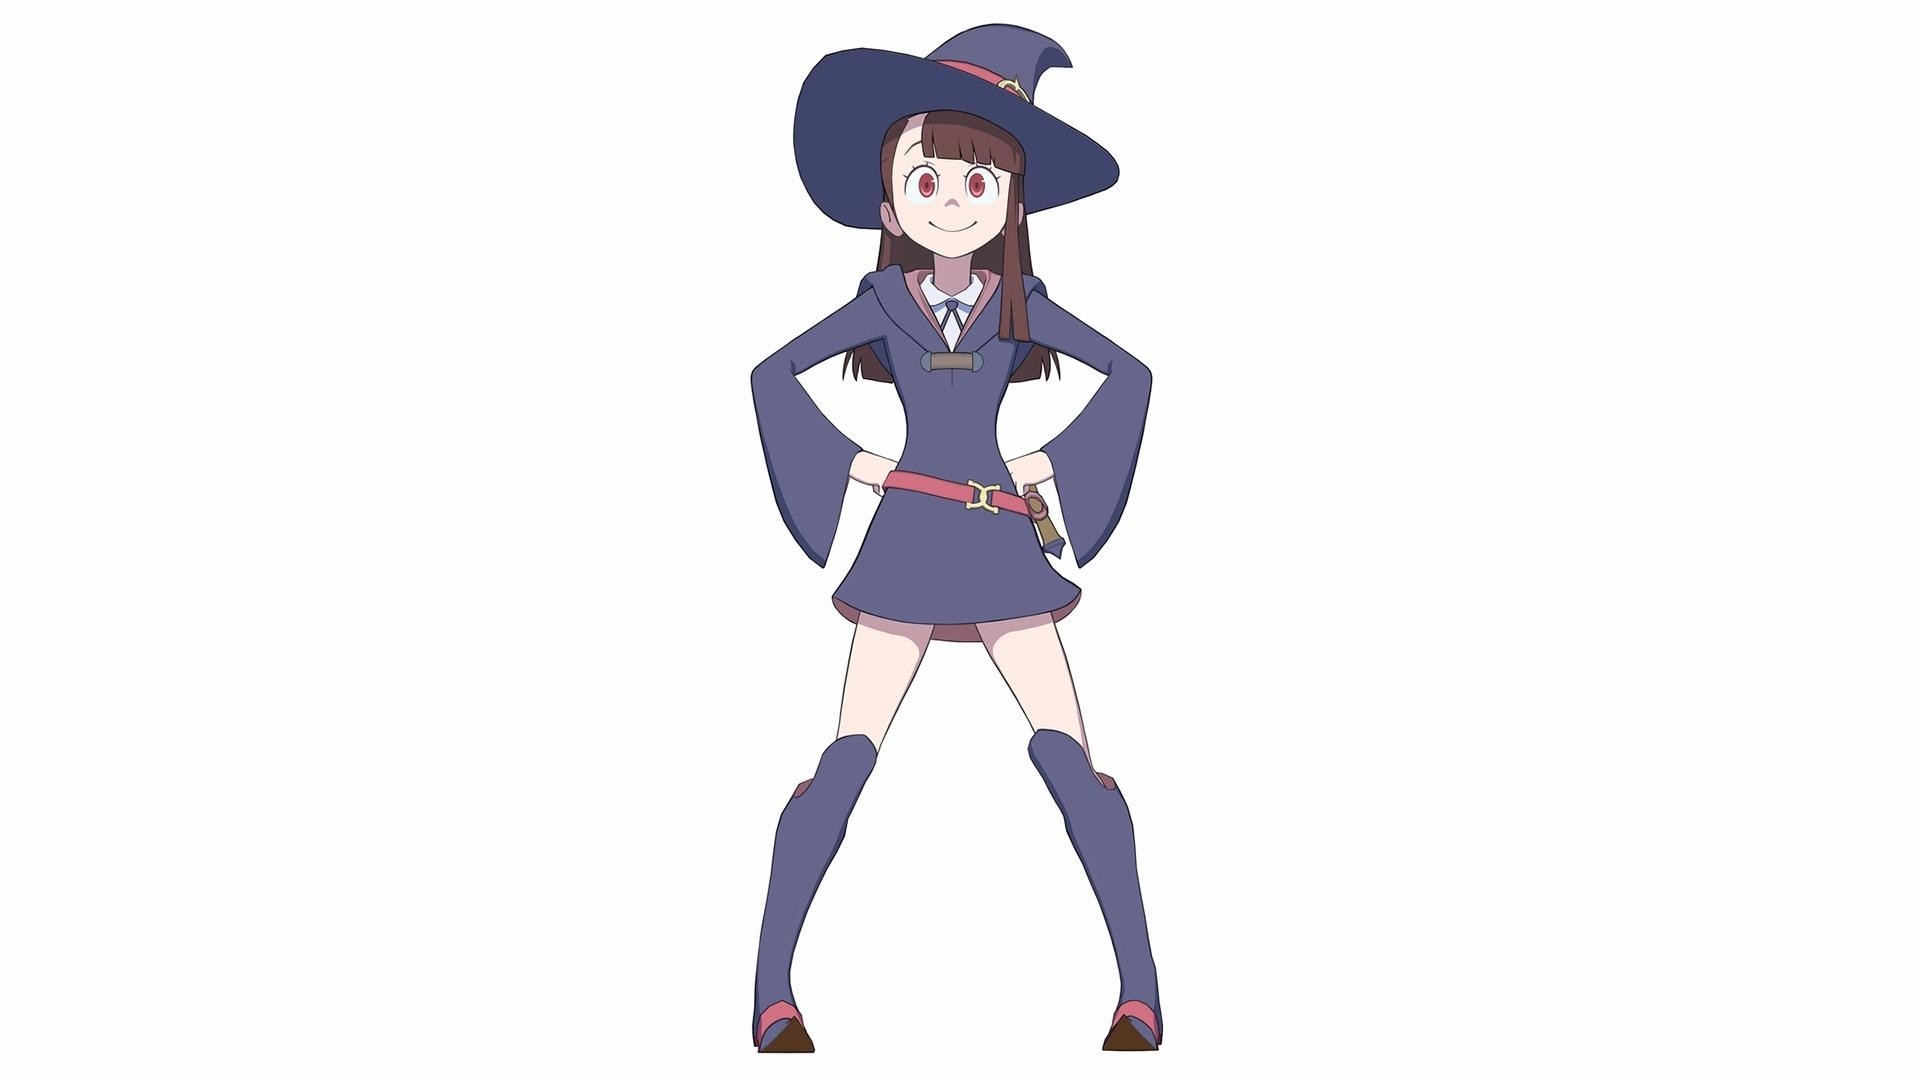 Little Witch Academia wallpaper